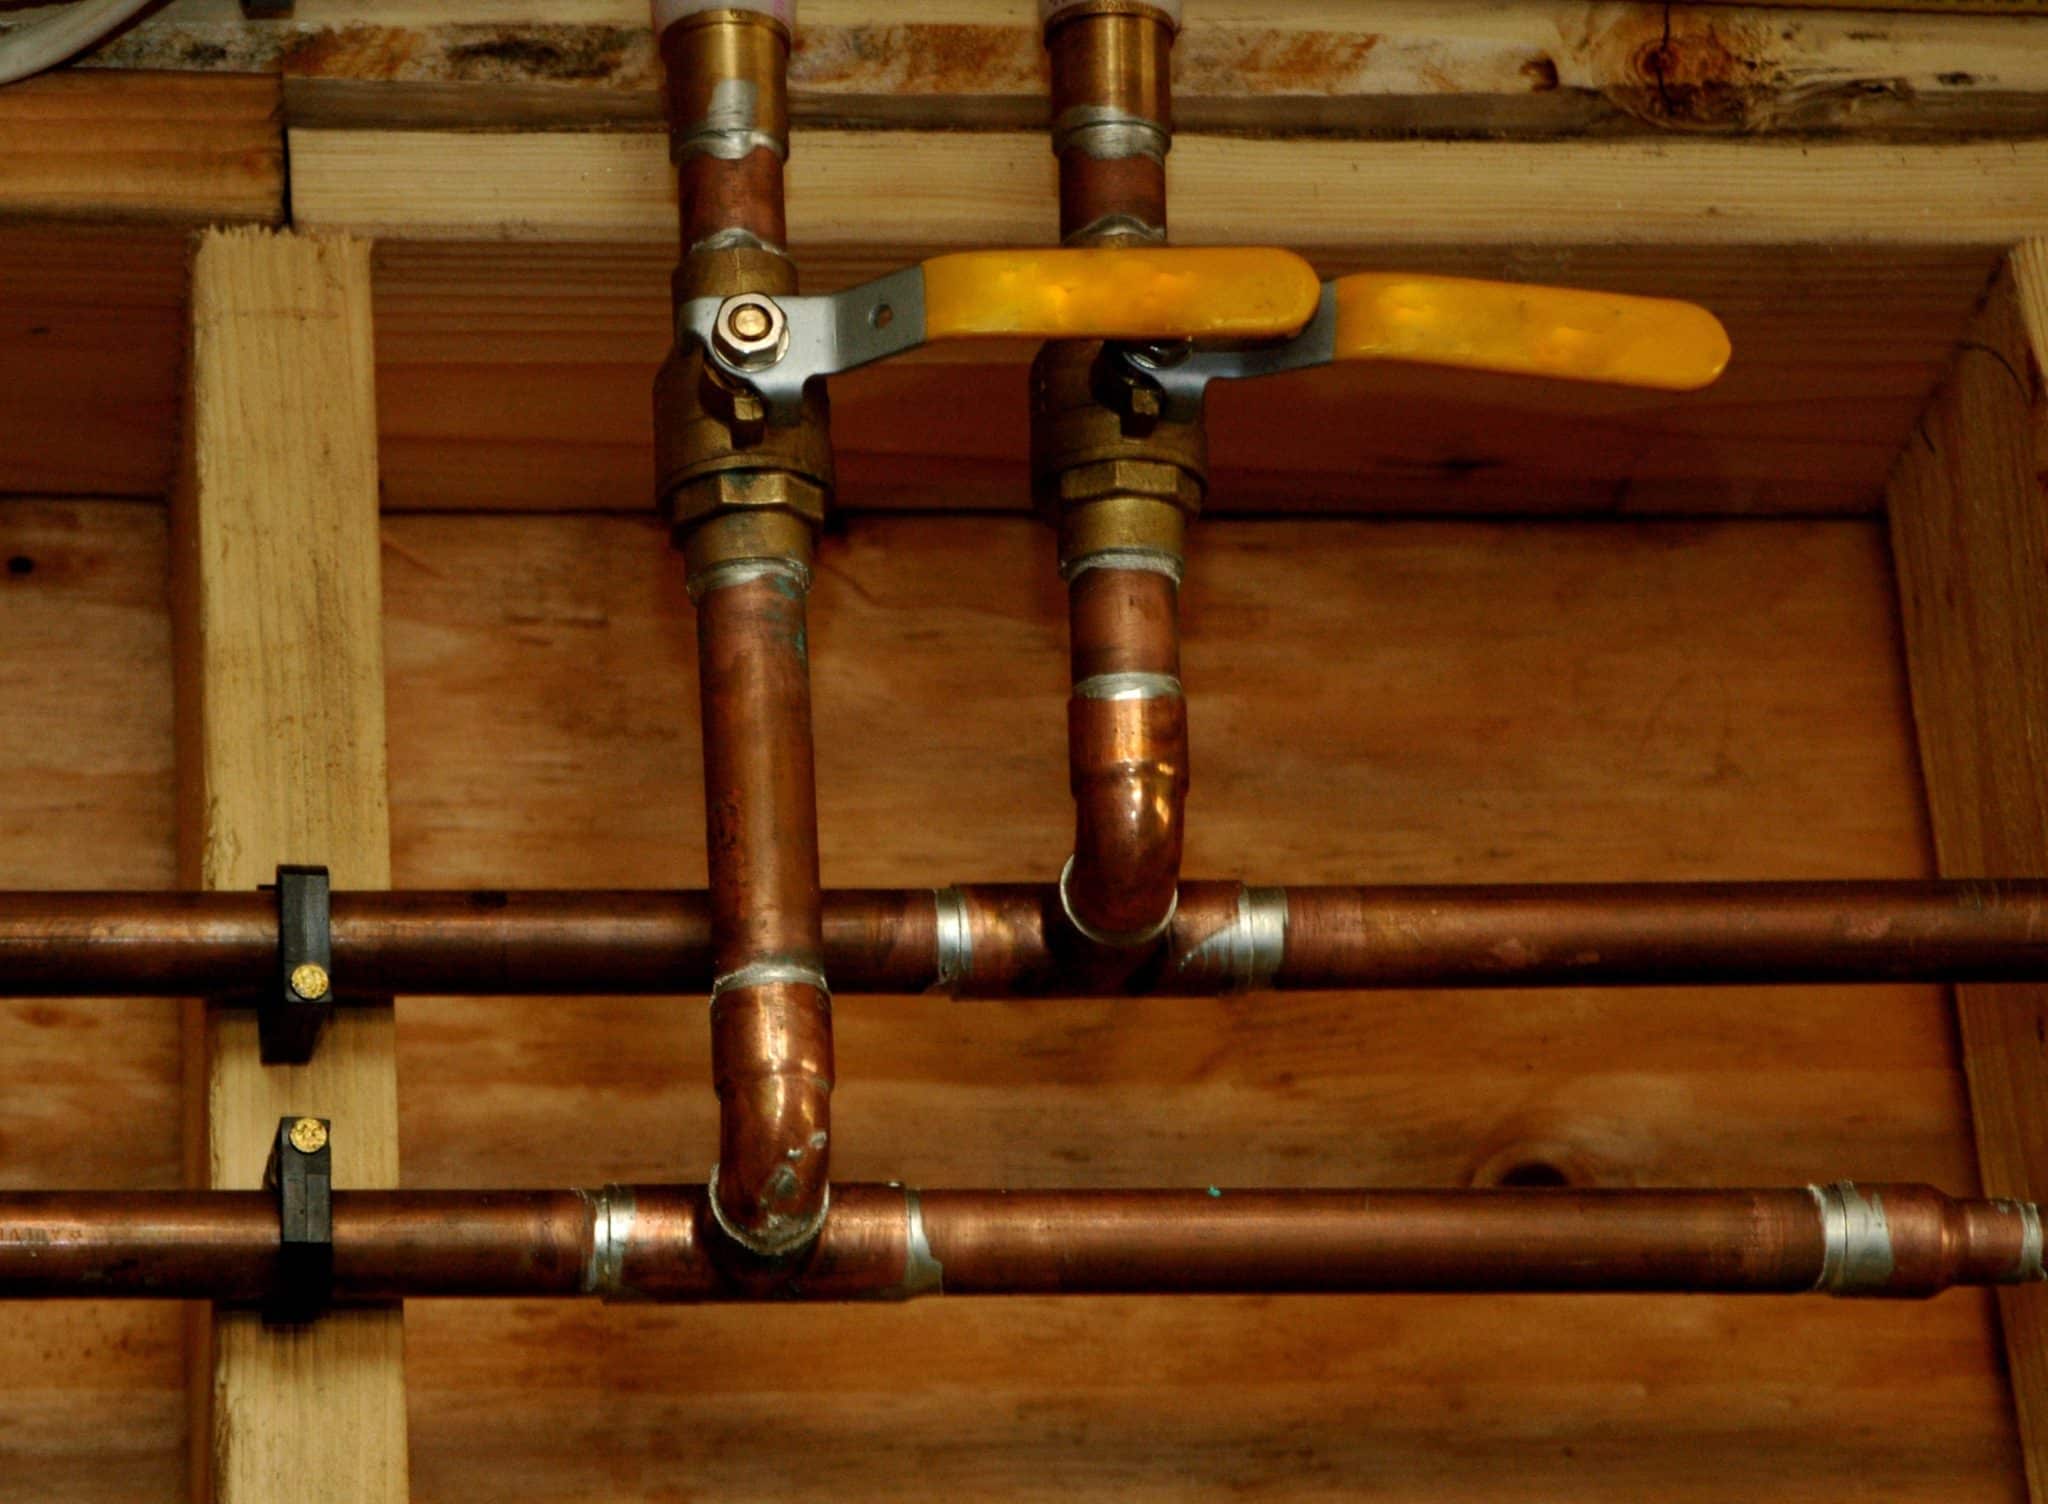 Why Are My Copper Pipes Suddenly Springing Tiny Leaks?